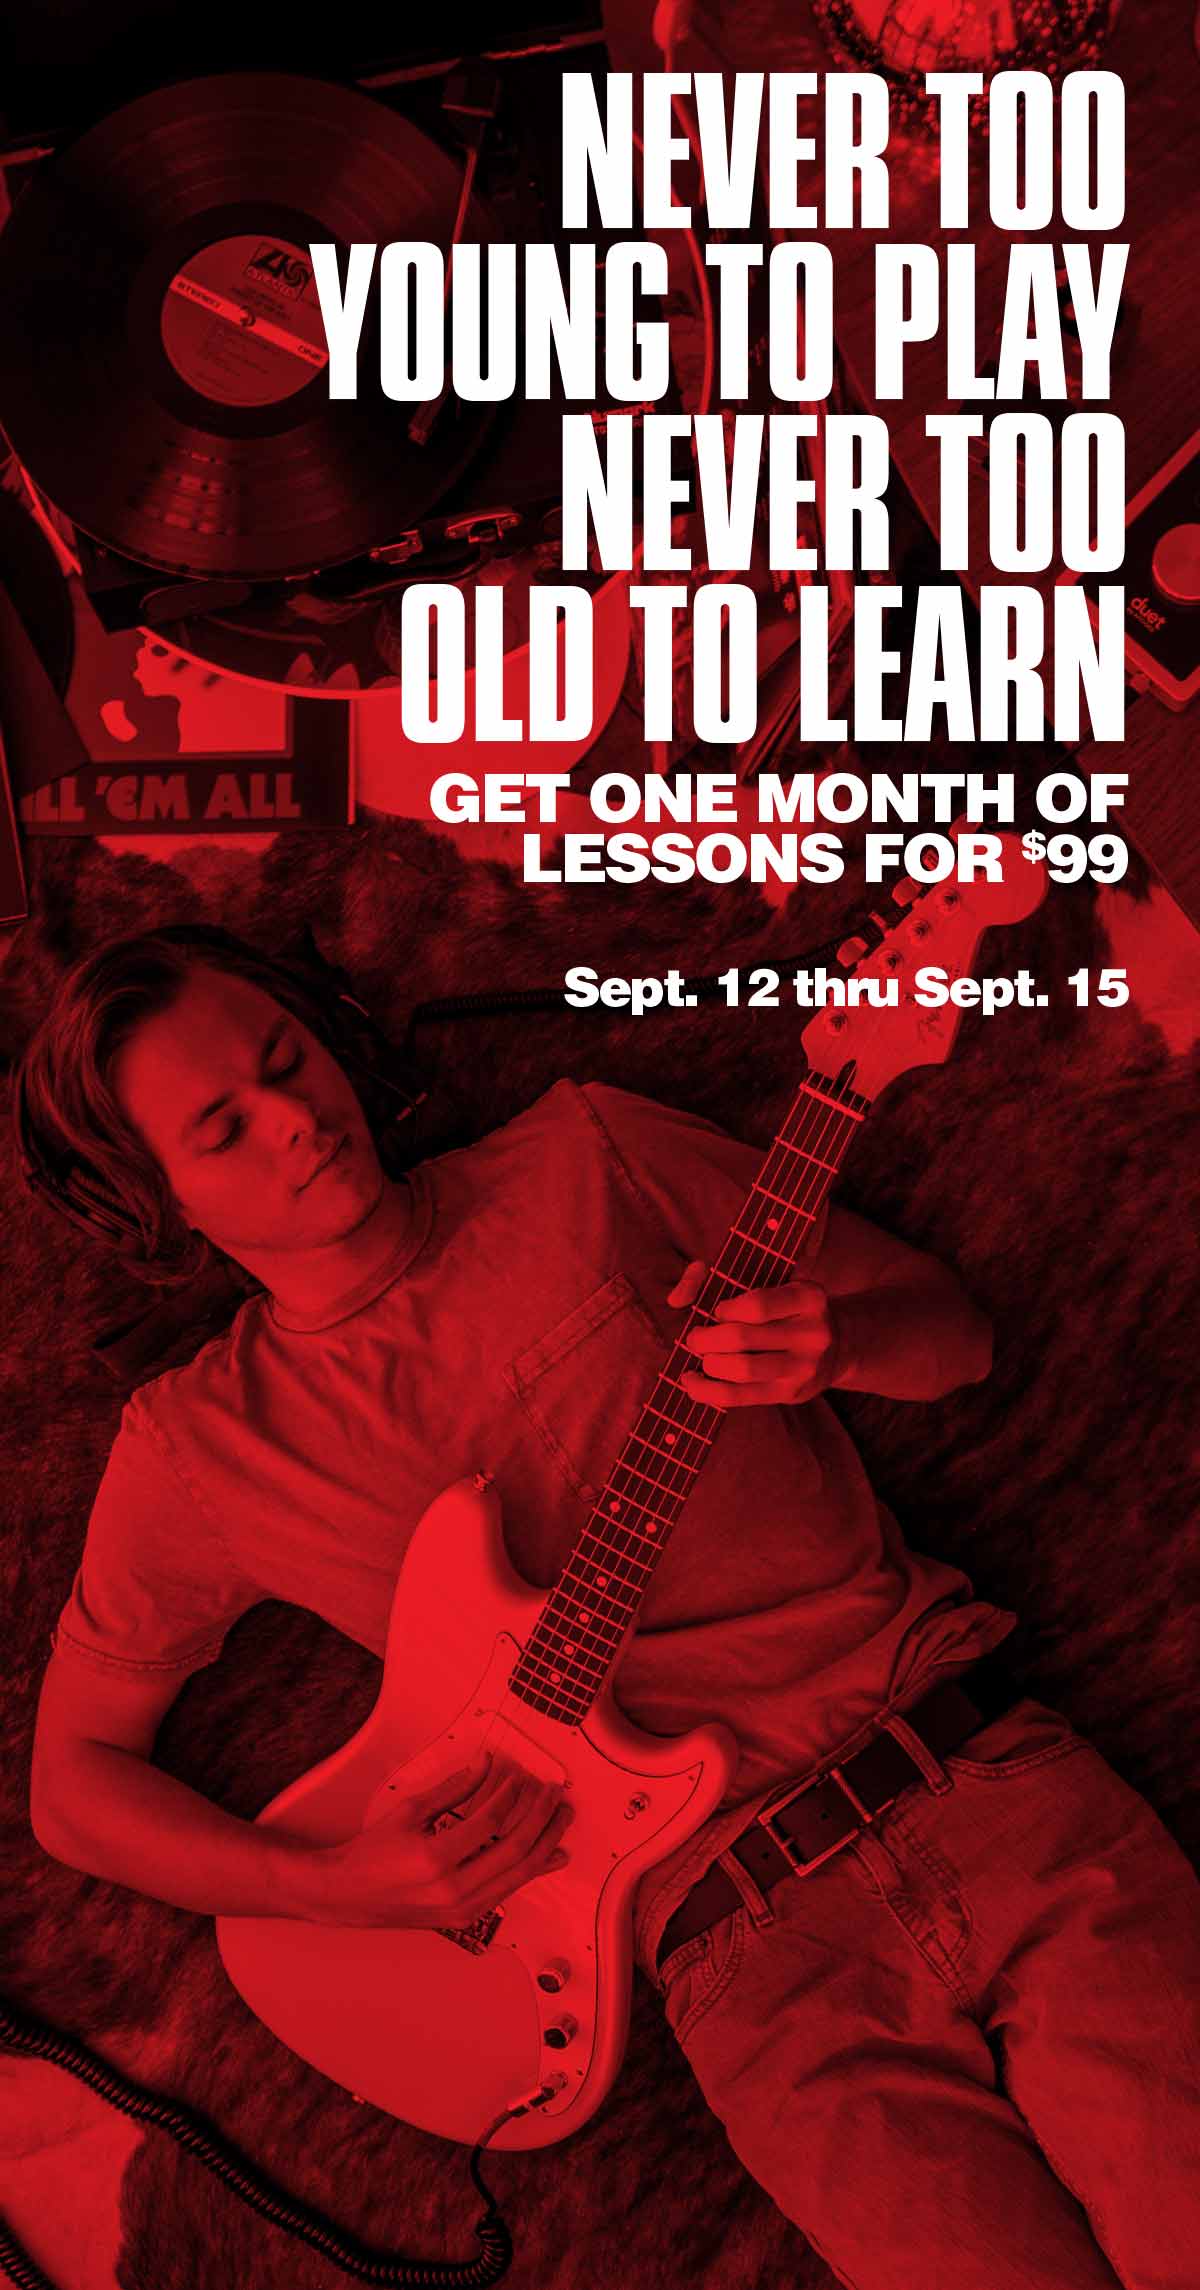 Never Too Young To Play. Never Too Old To Learn. Get One Month of Lesson For 99 Dollars. September 12 thru September 15.